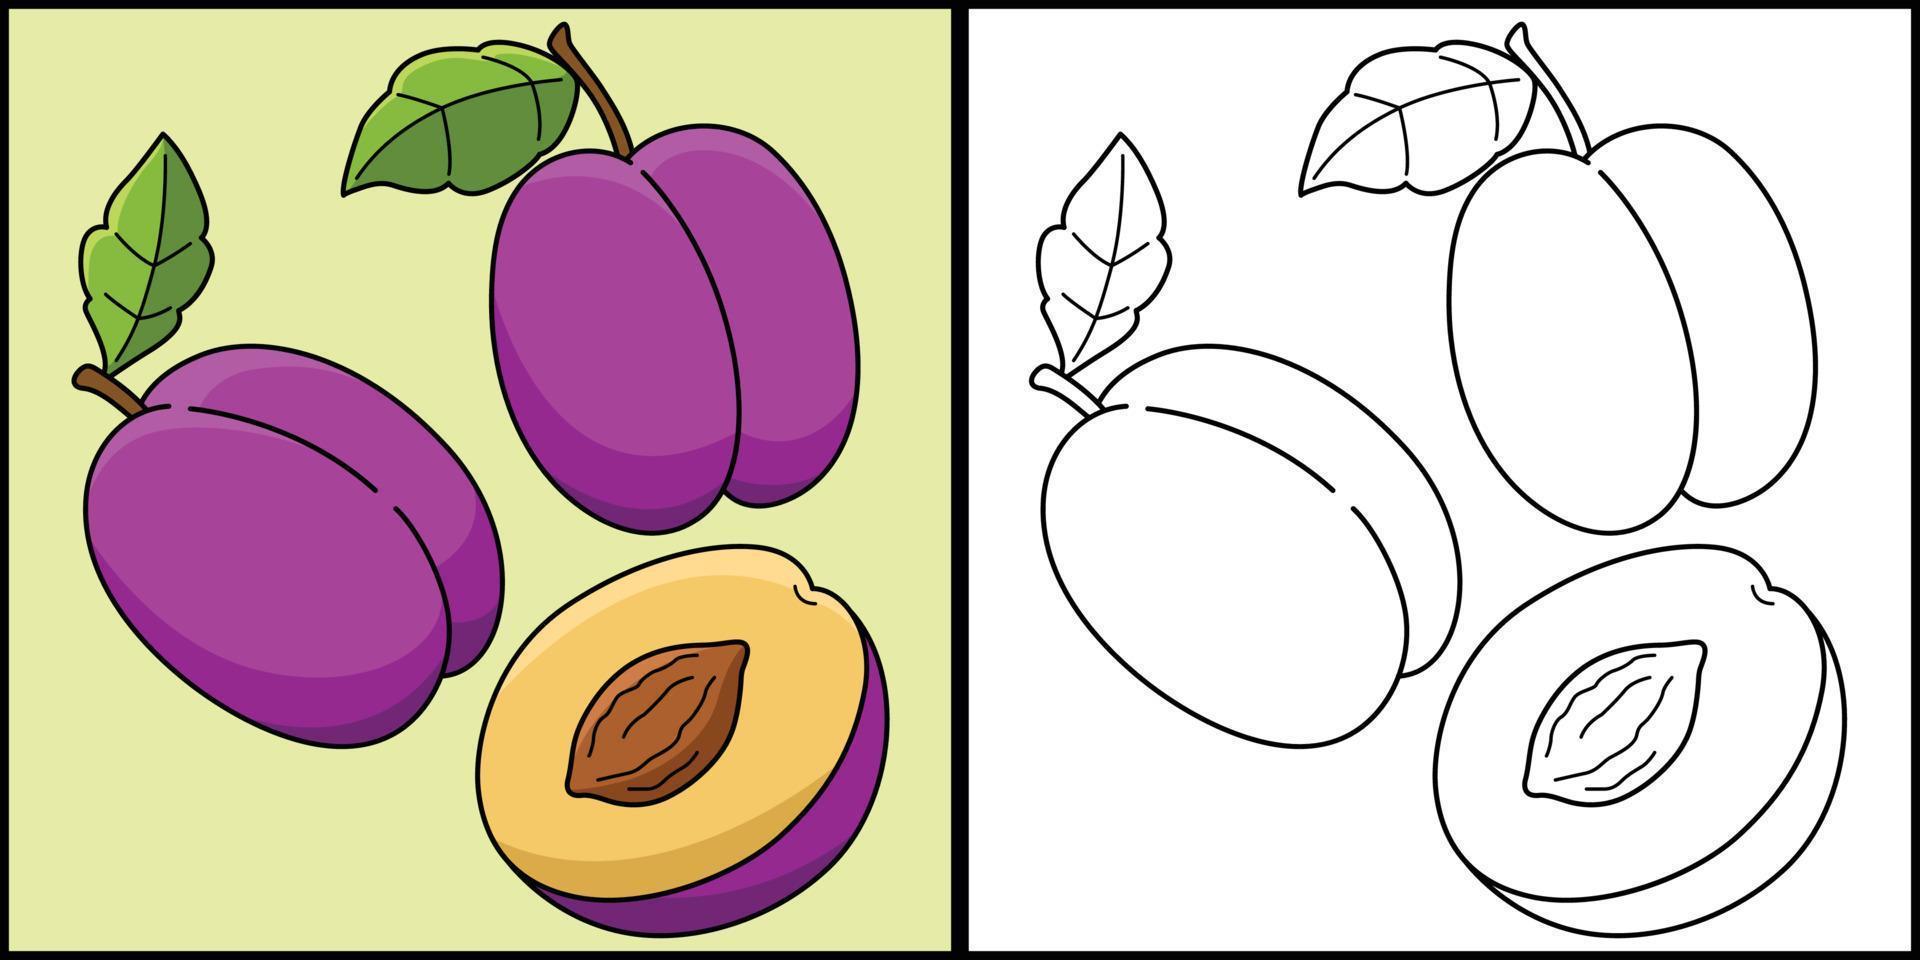 Plum Fruit Vegetable Coloring Page Illustration vector